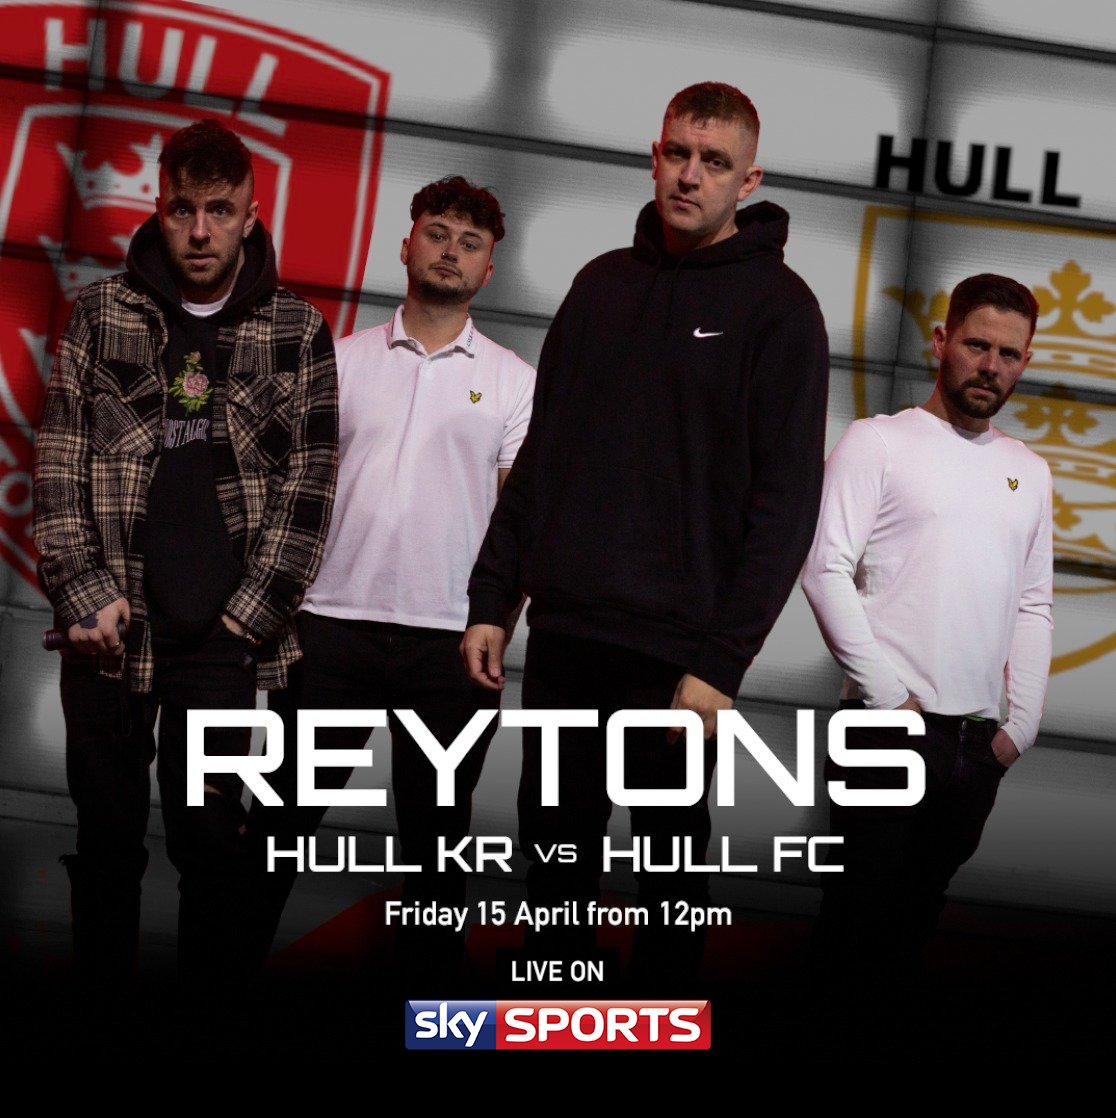 LIVE ON SKY SPORTS!!! We'll be performing live on @SkySports next Friday at Craven Park as @hullkrofficial take on @hullfcofficial in one of the biggest games of the Ruby League Season!! Tune in and join us live from 12pm... #AllReytons